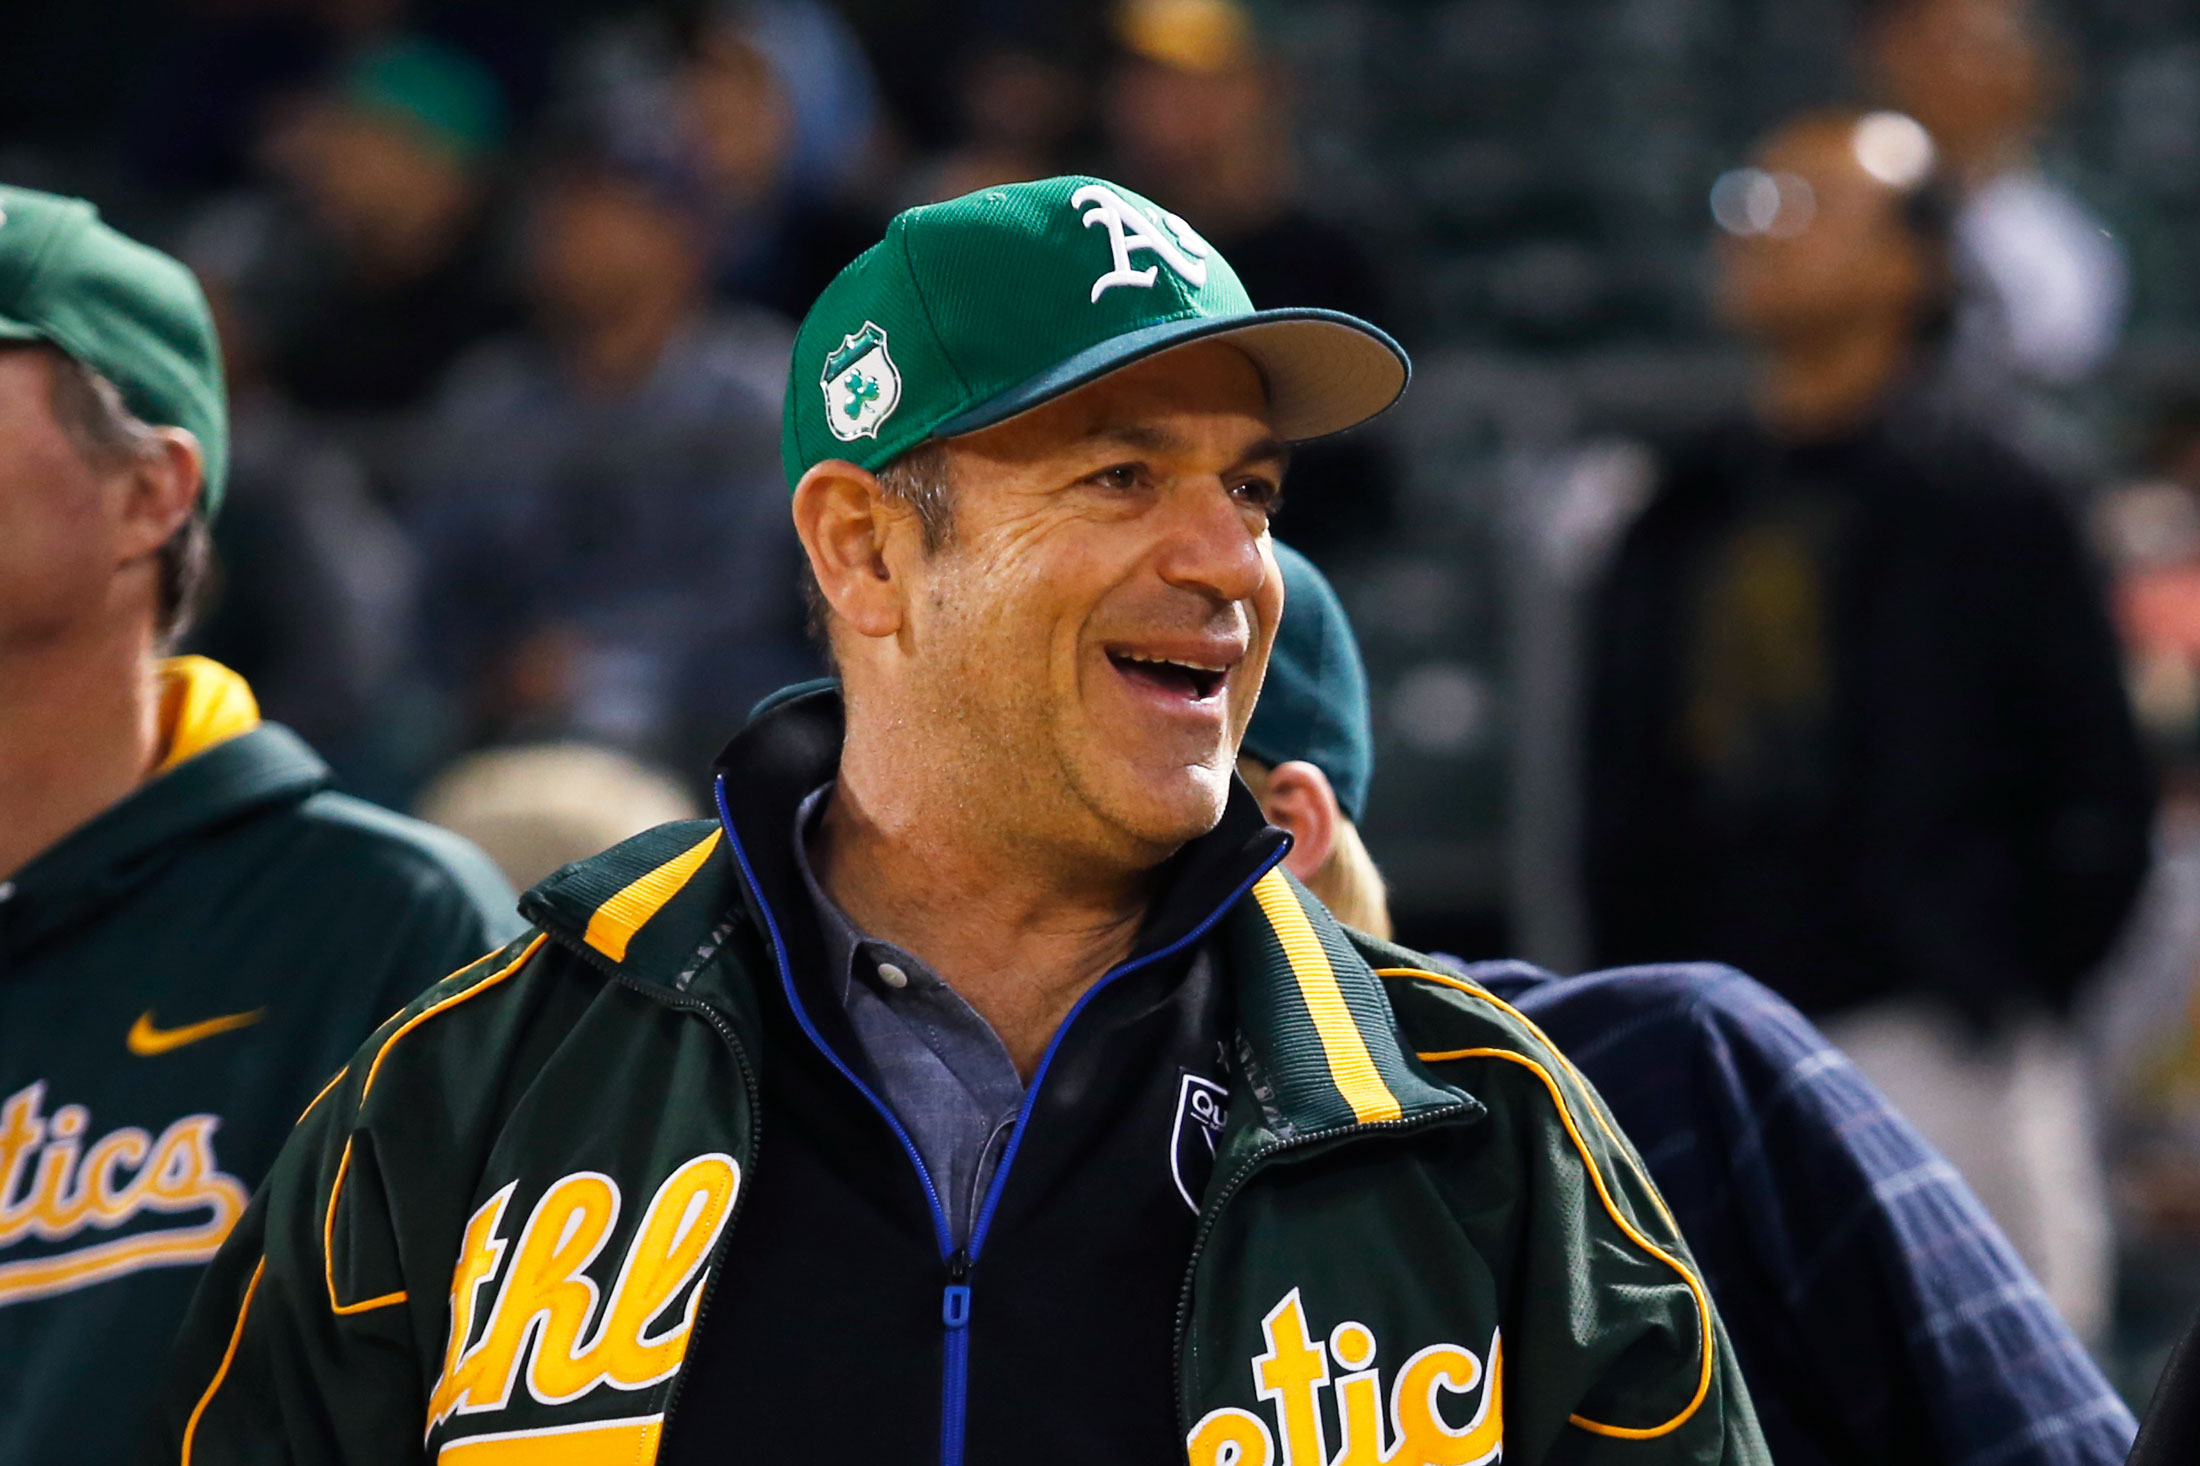 A's pitcher Trevor May rips Oakland owner John Fisher in